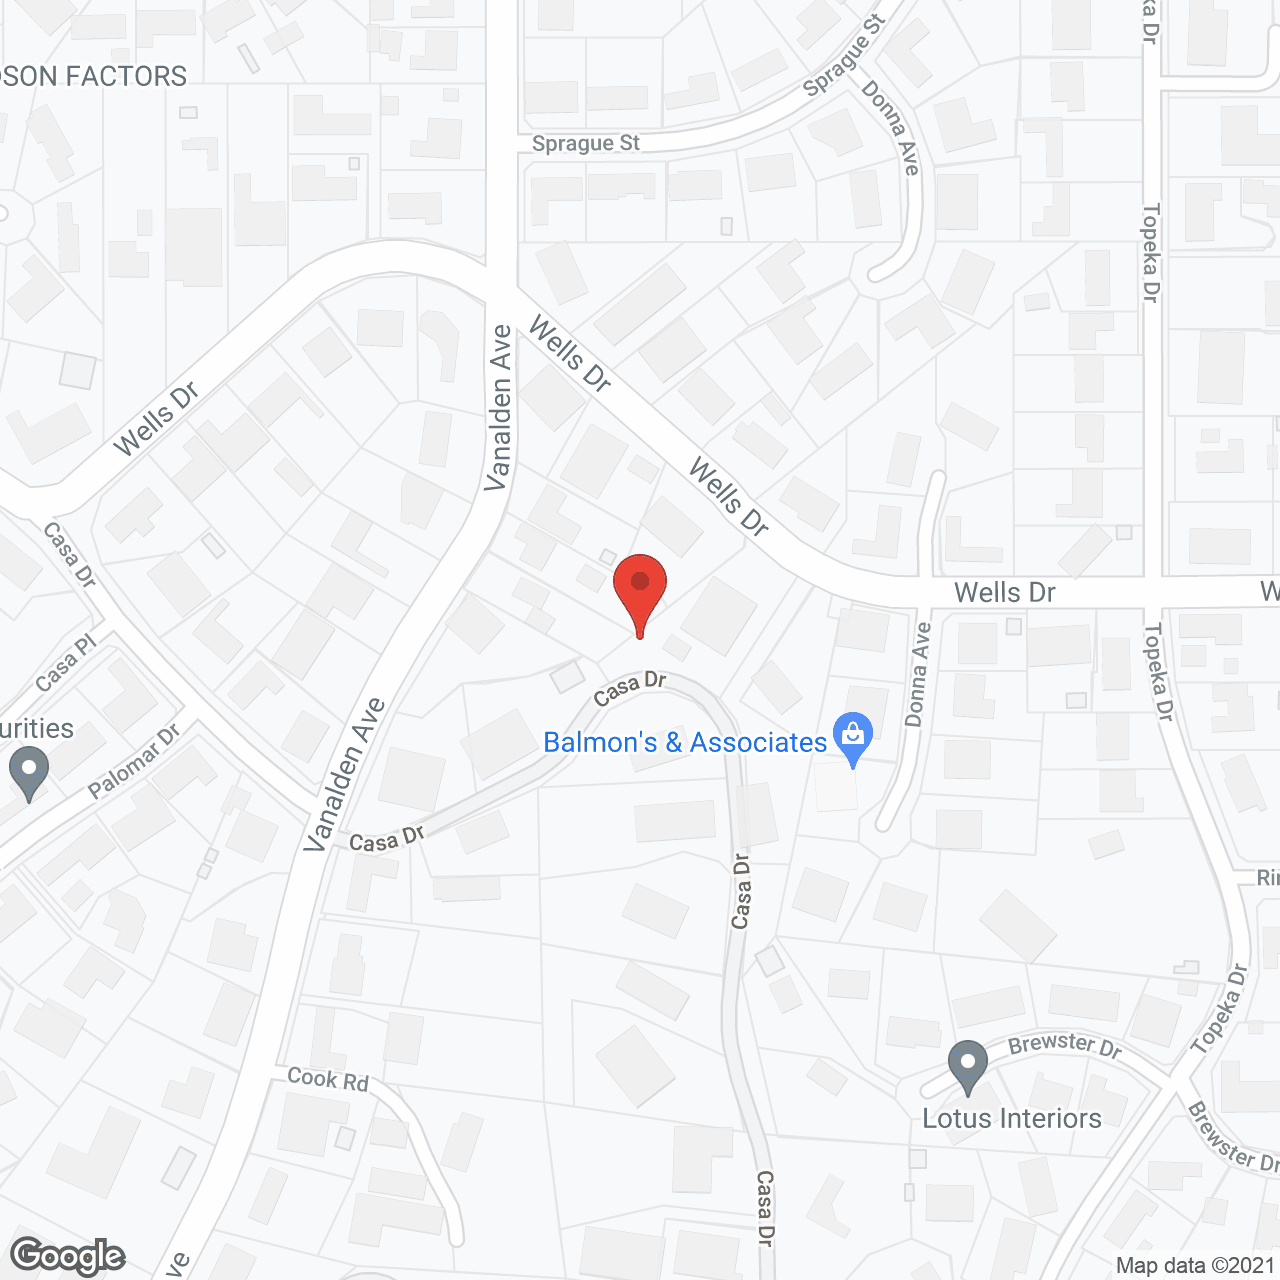 1Heart Caregiver Services - Los Angeles in google map